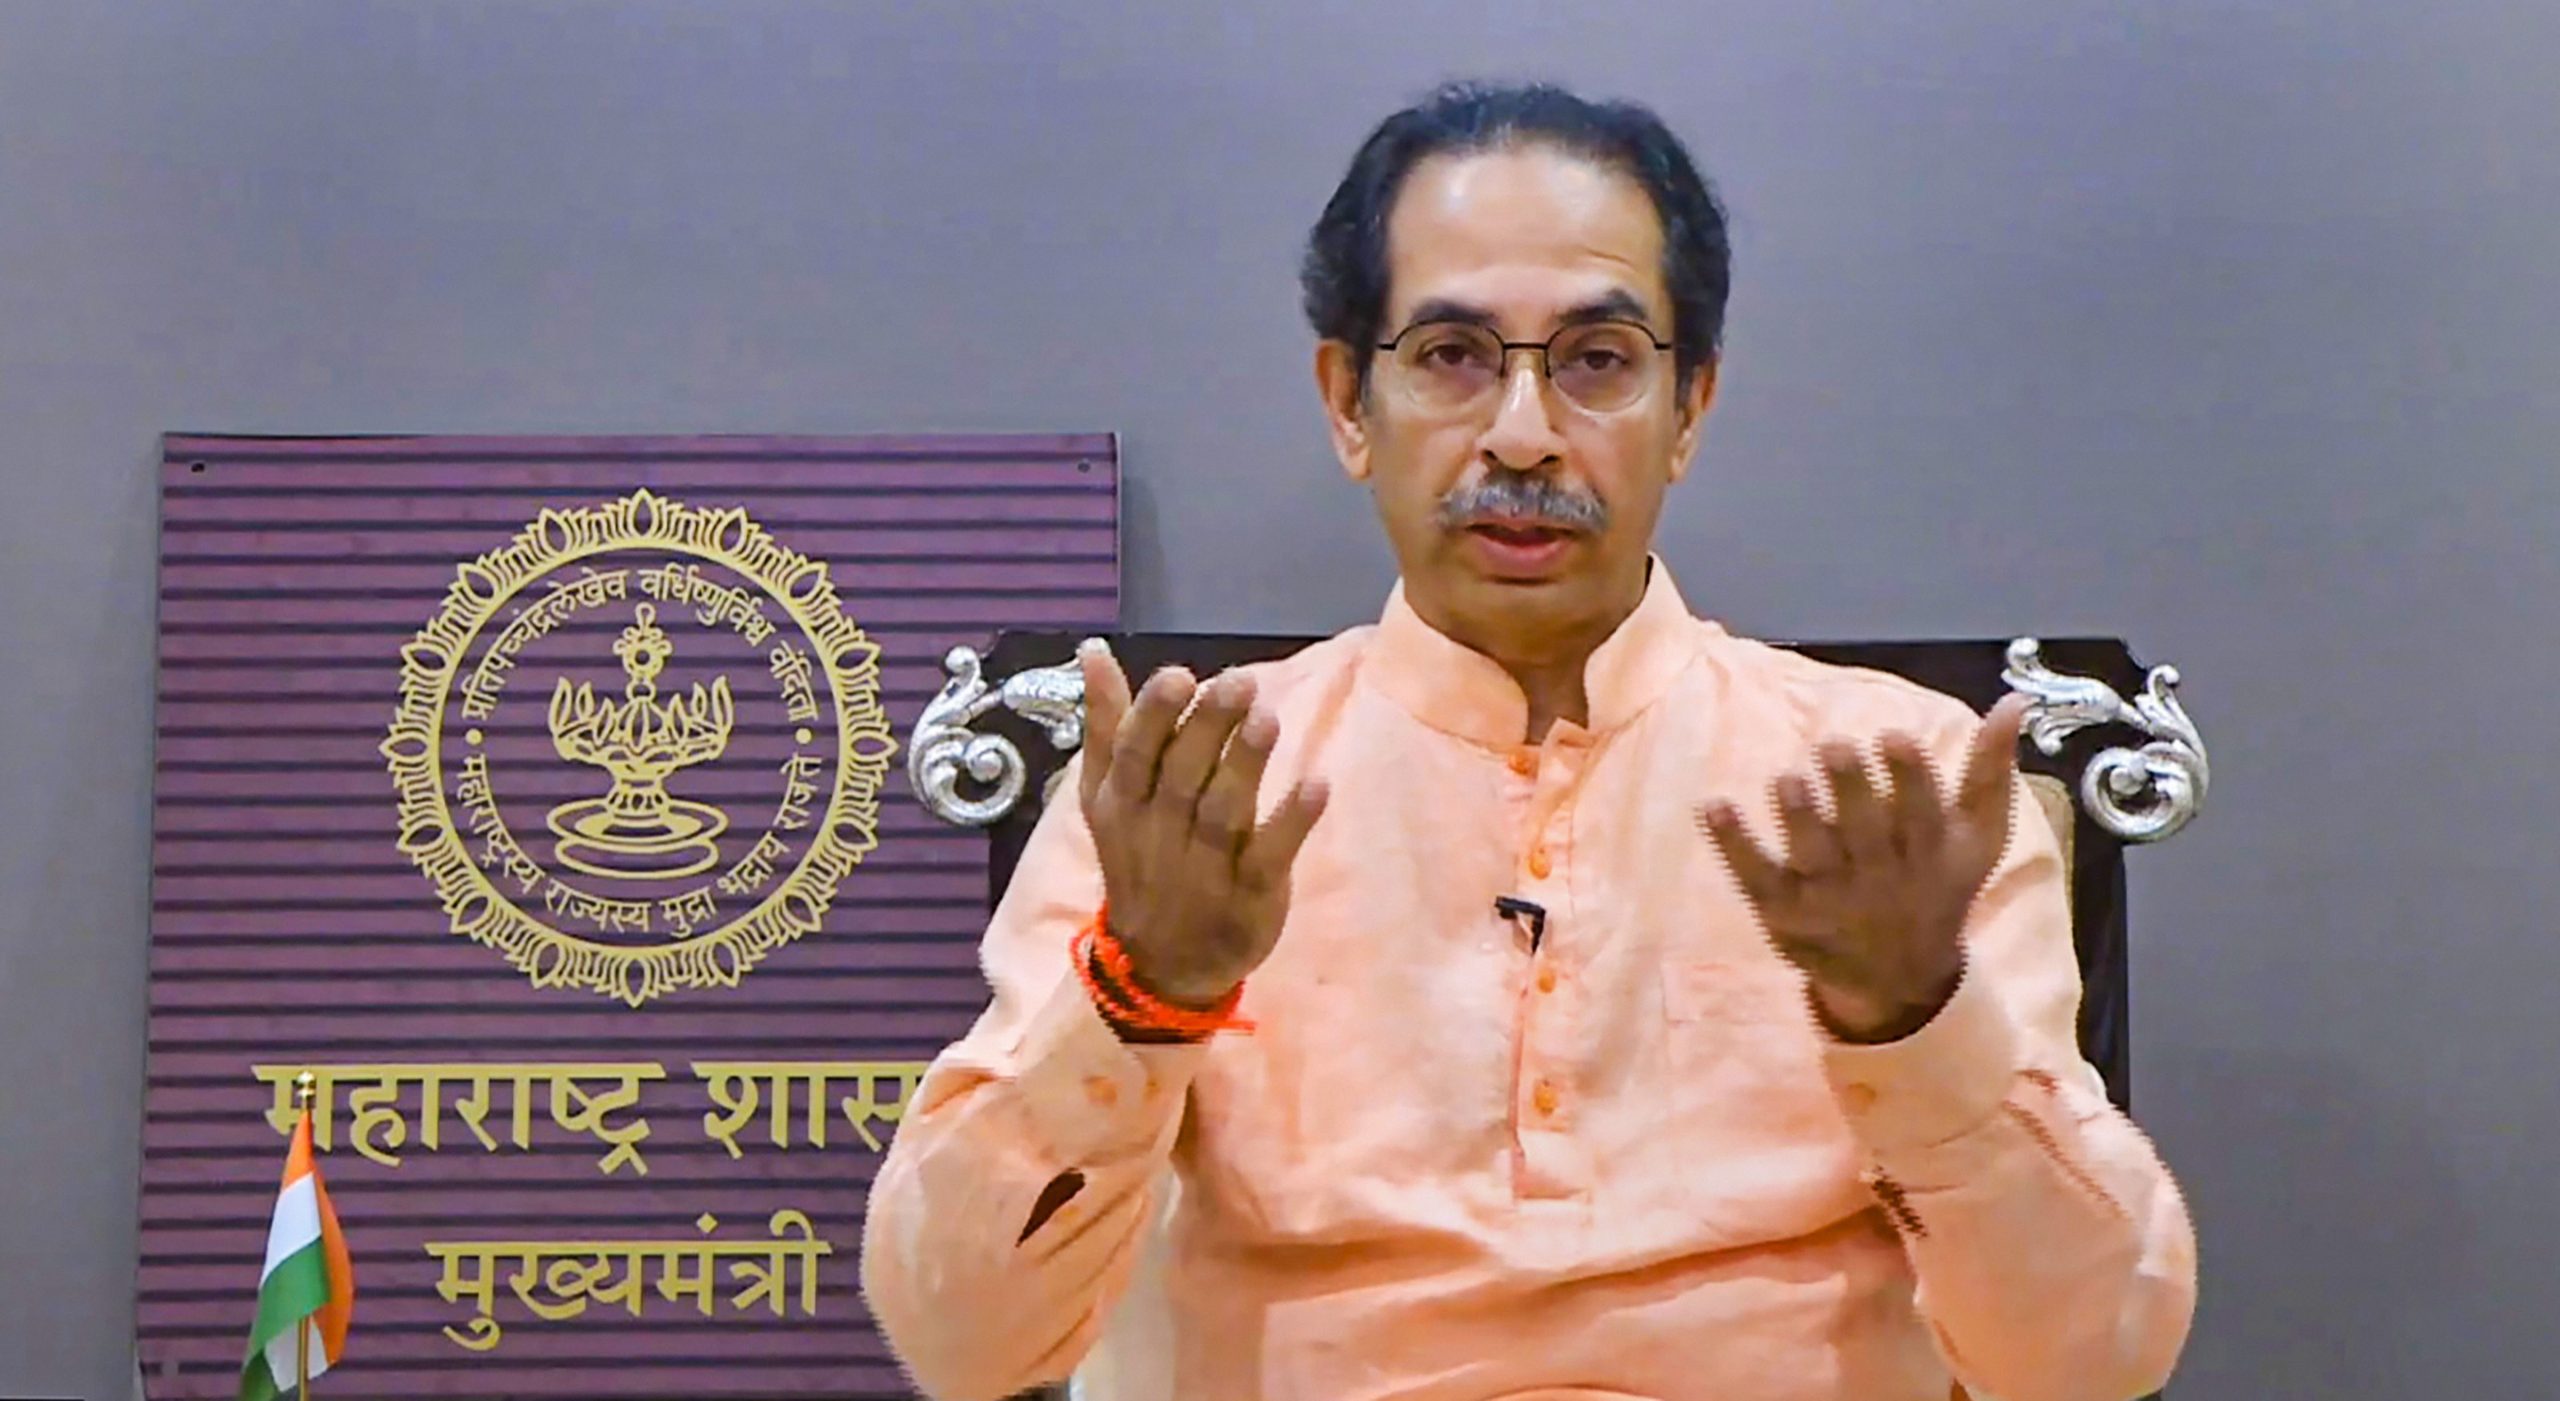 CM Uddhav Thackeray warns of another lockdown after Maharashtra records 7,000 COVID-19 cases in 24 hours